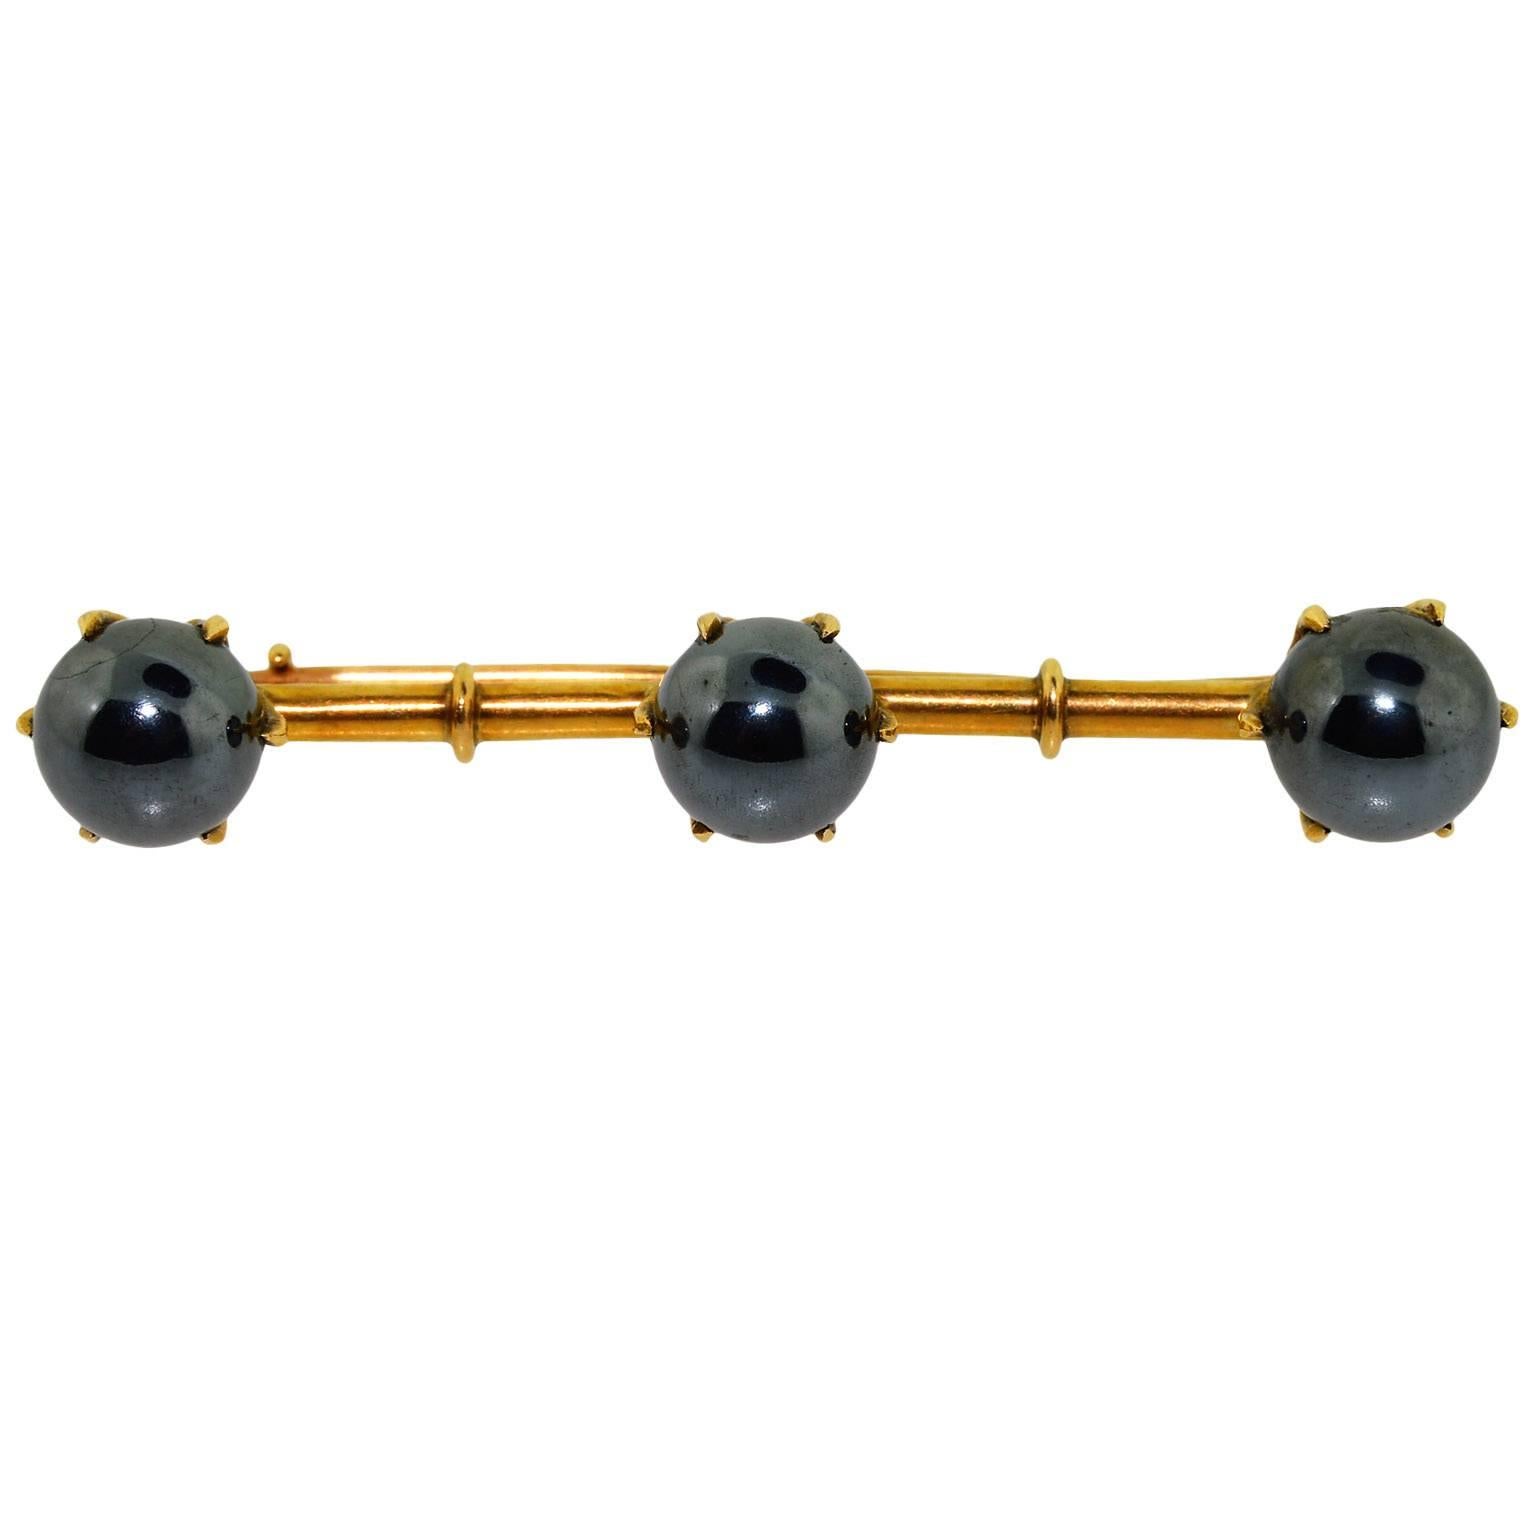 Art Deco Pin with Three Hematite Balls Hand Constructed in Solid Rose Gold In Excellent Condition For Sale In Long Beach, CA